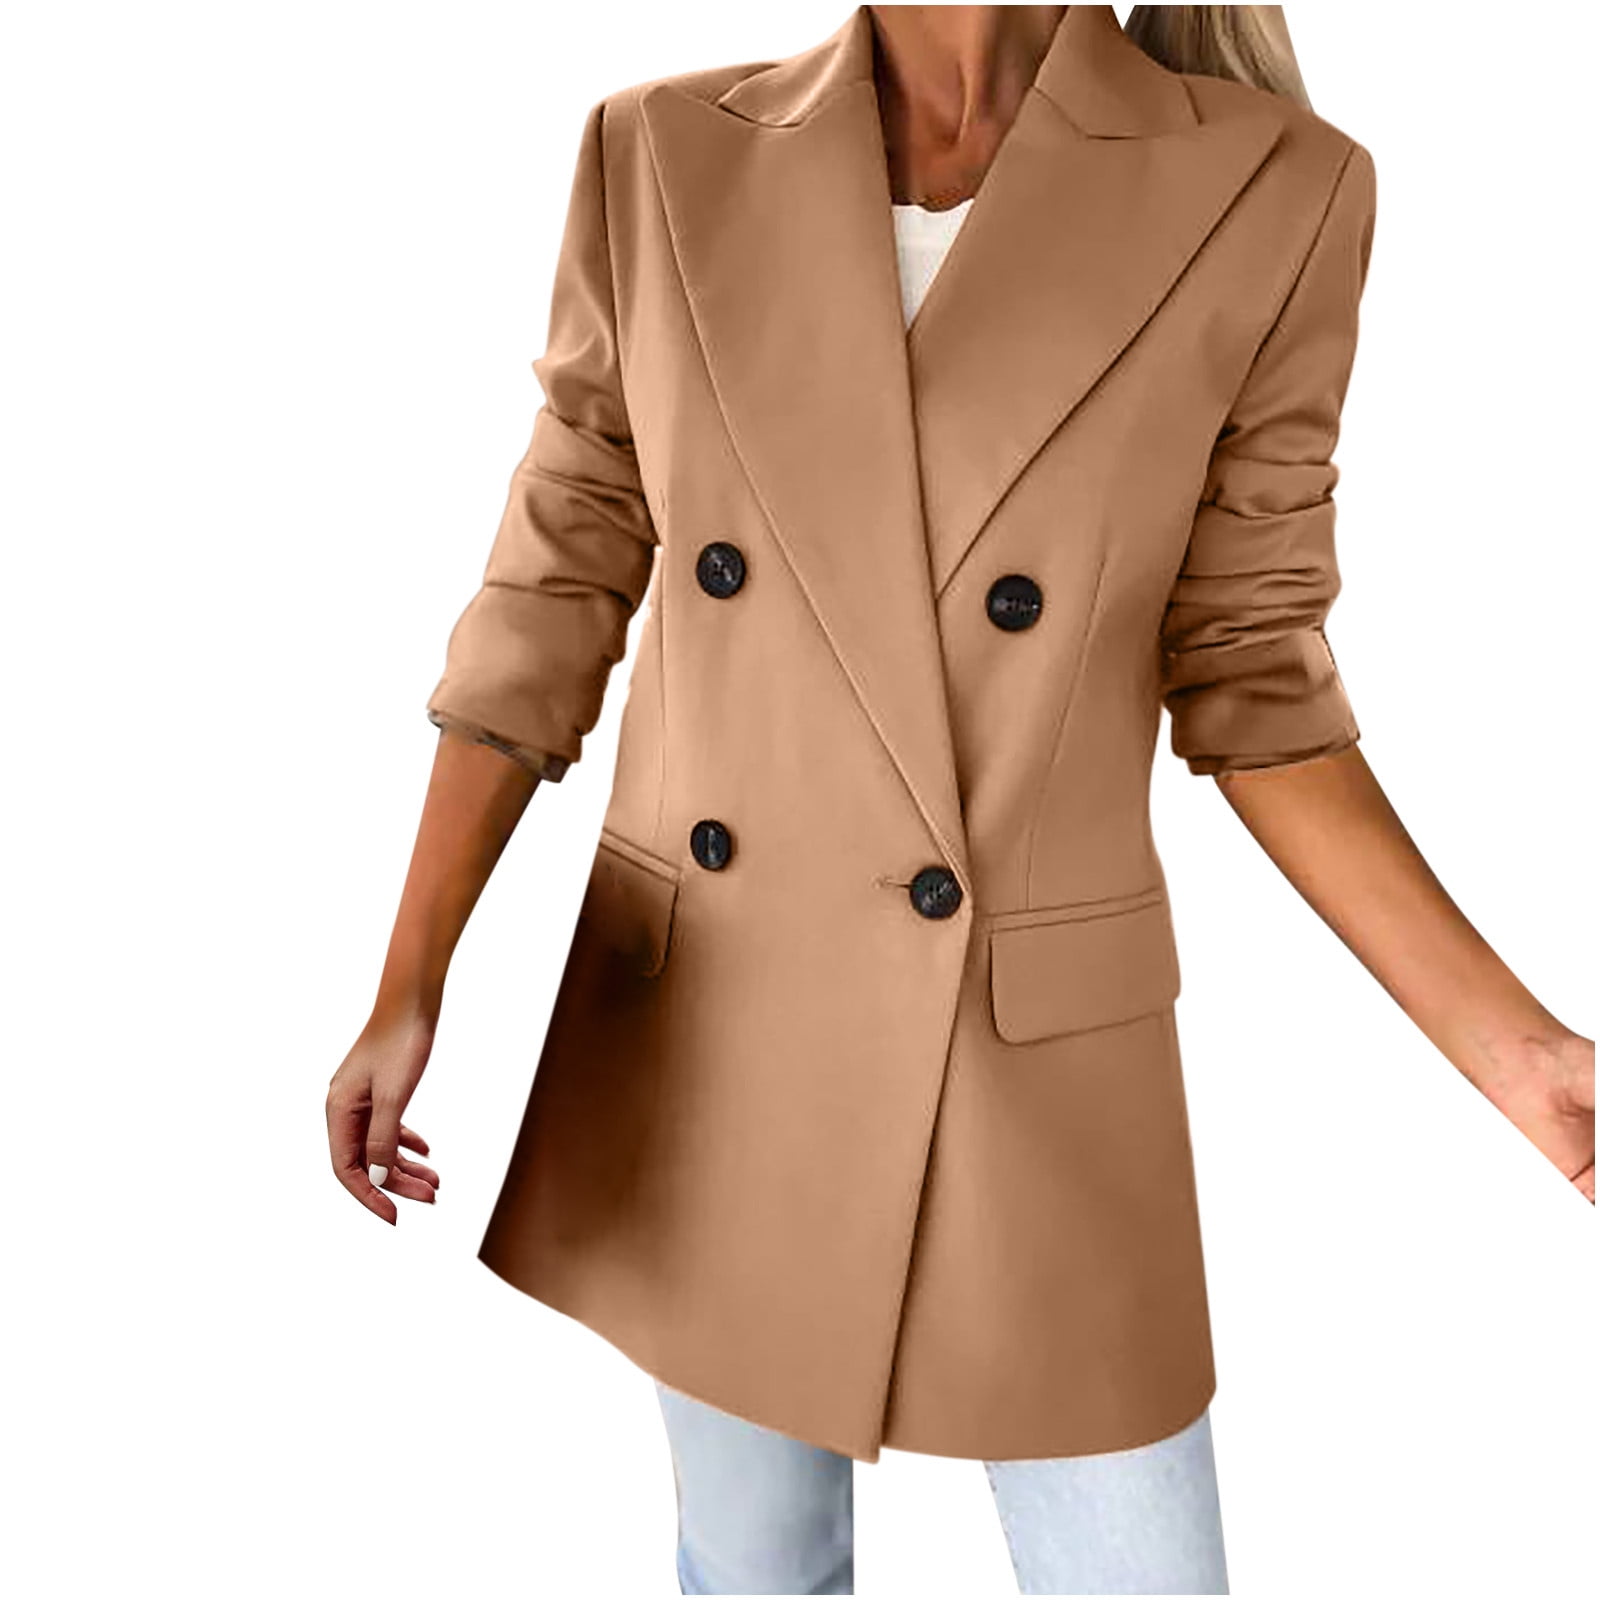 Orly Collection Made by Obadiah Collection Womens Double Breasted Blazer Long Sleeves Blazer Jackets for Women Gold Button Blazer Jackets for Women Blazers for Work